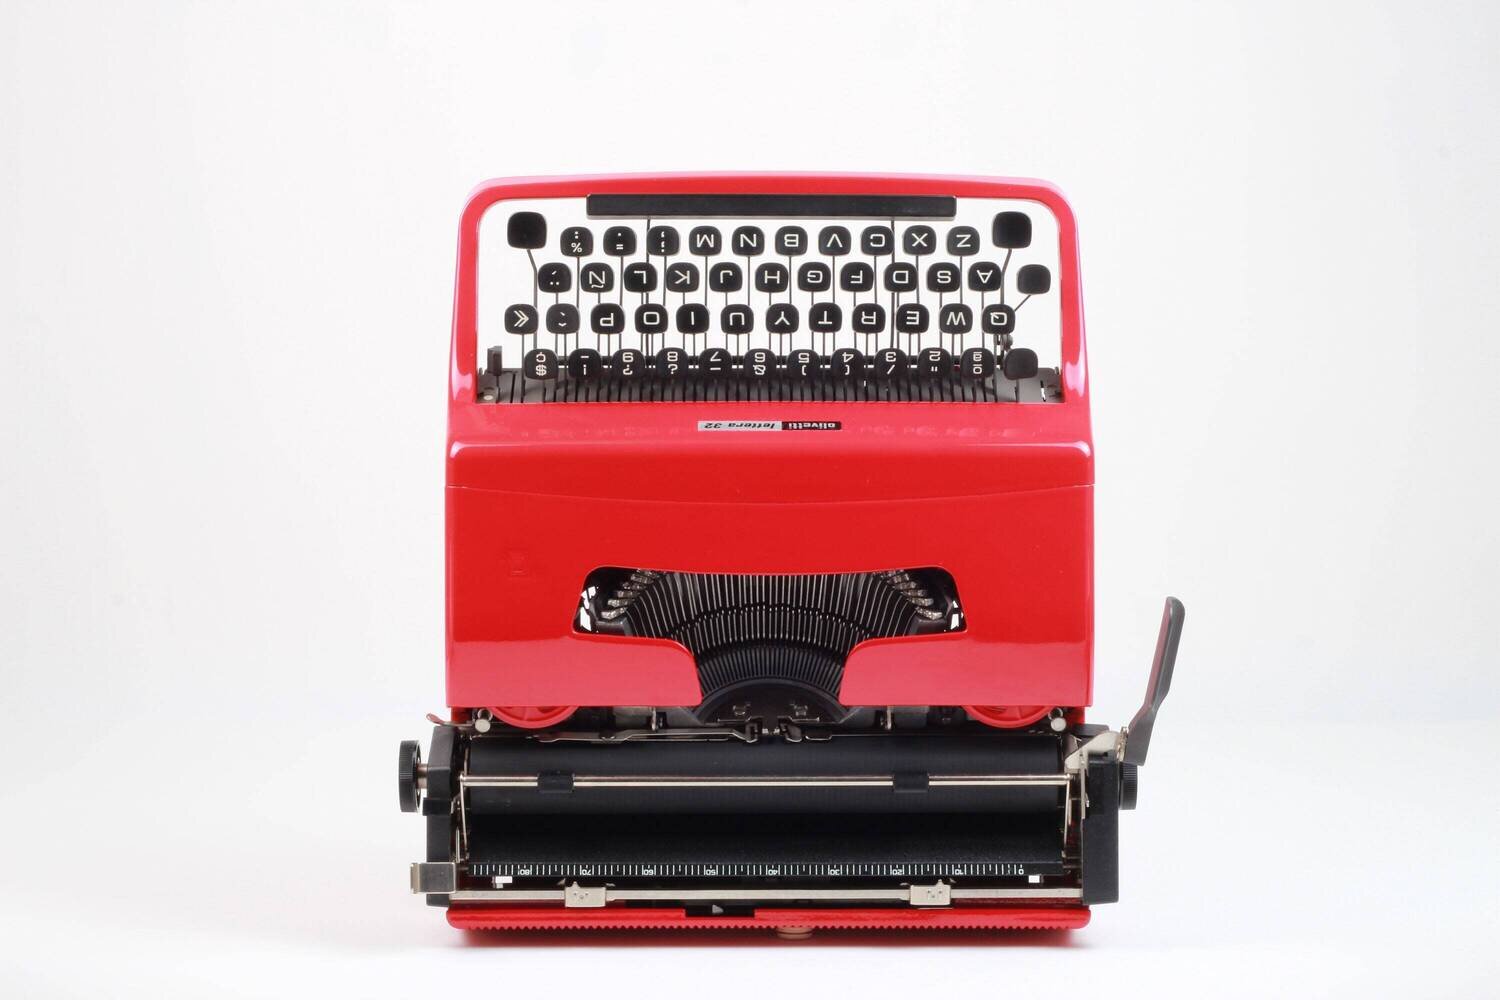 Limited Edition Olivetti Lettera 32 Red Typewriter, Vintage, Mint Condition, Manual Portable, Professionally Serviced by Typewriter.Company